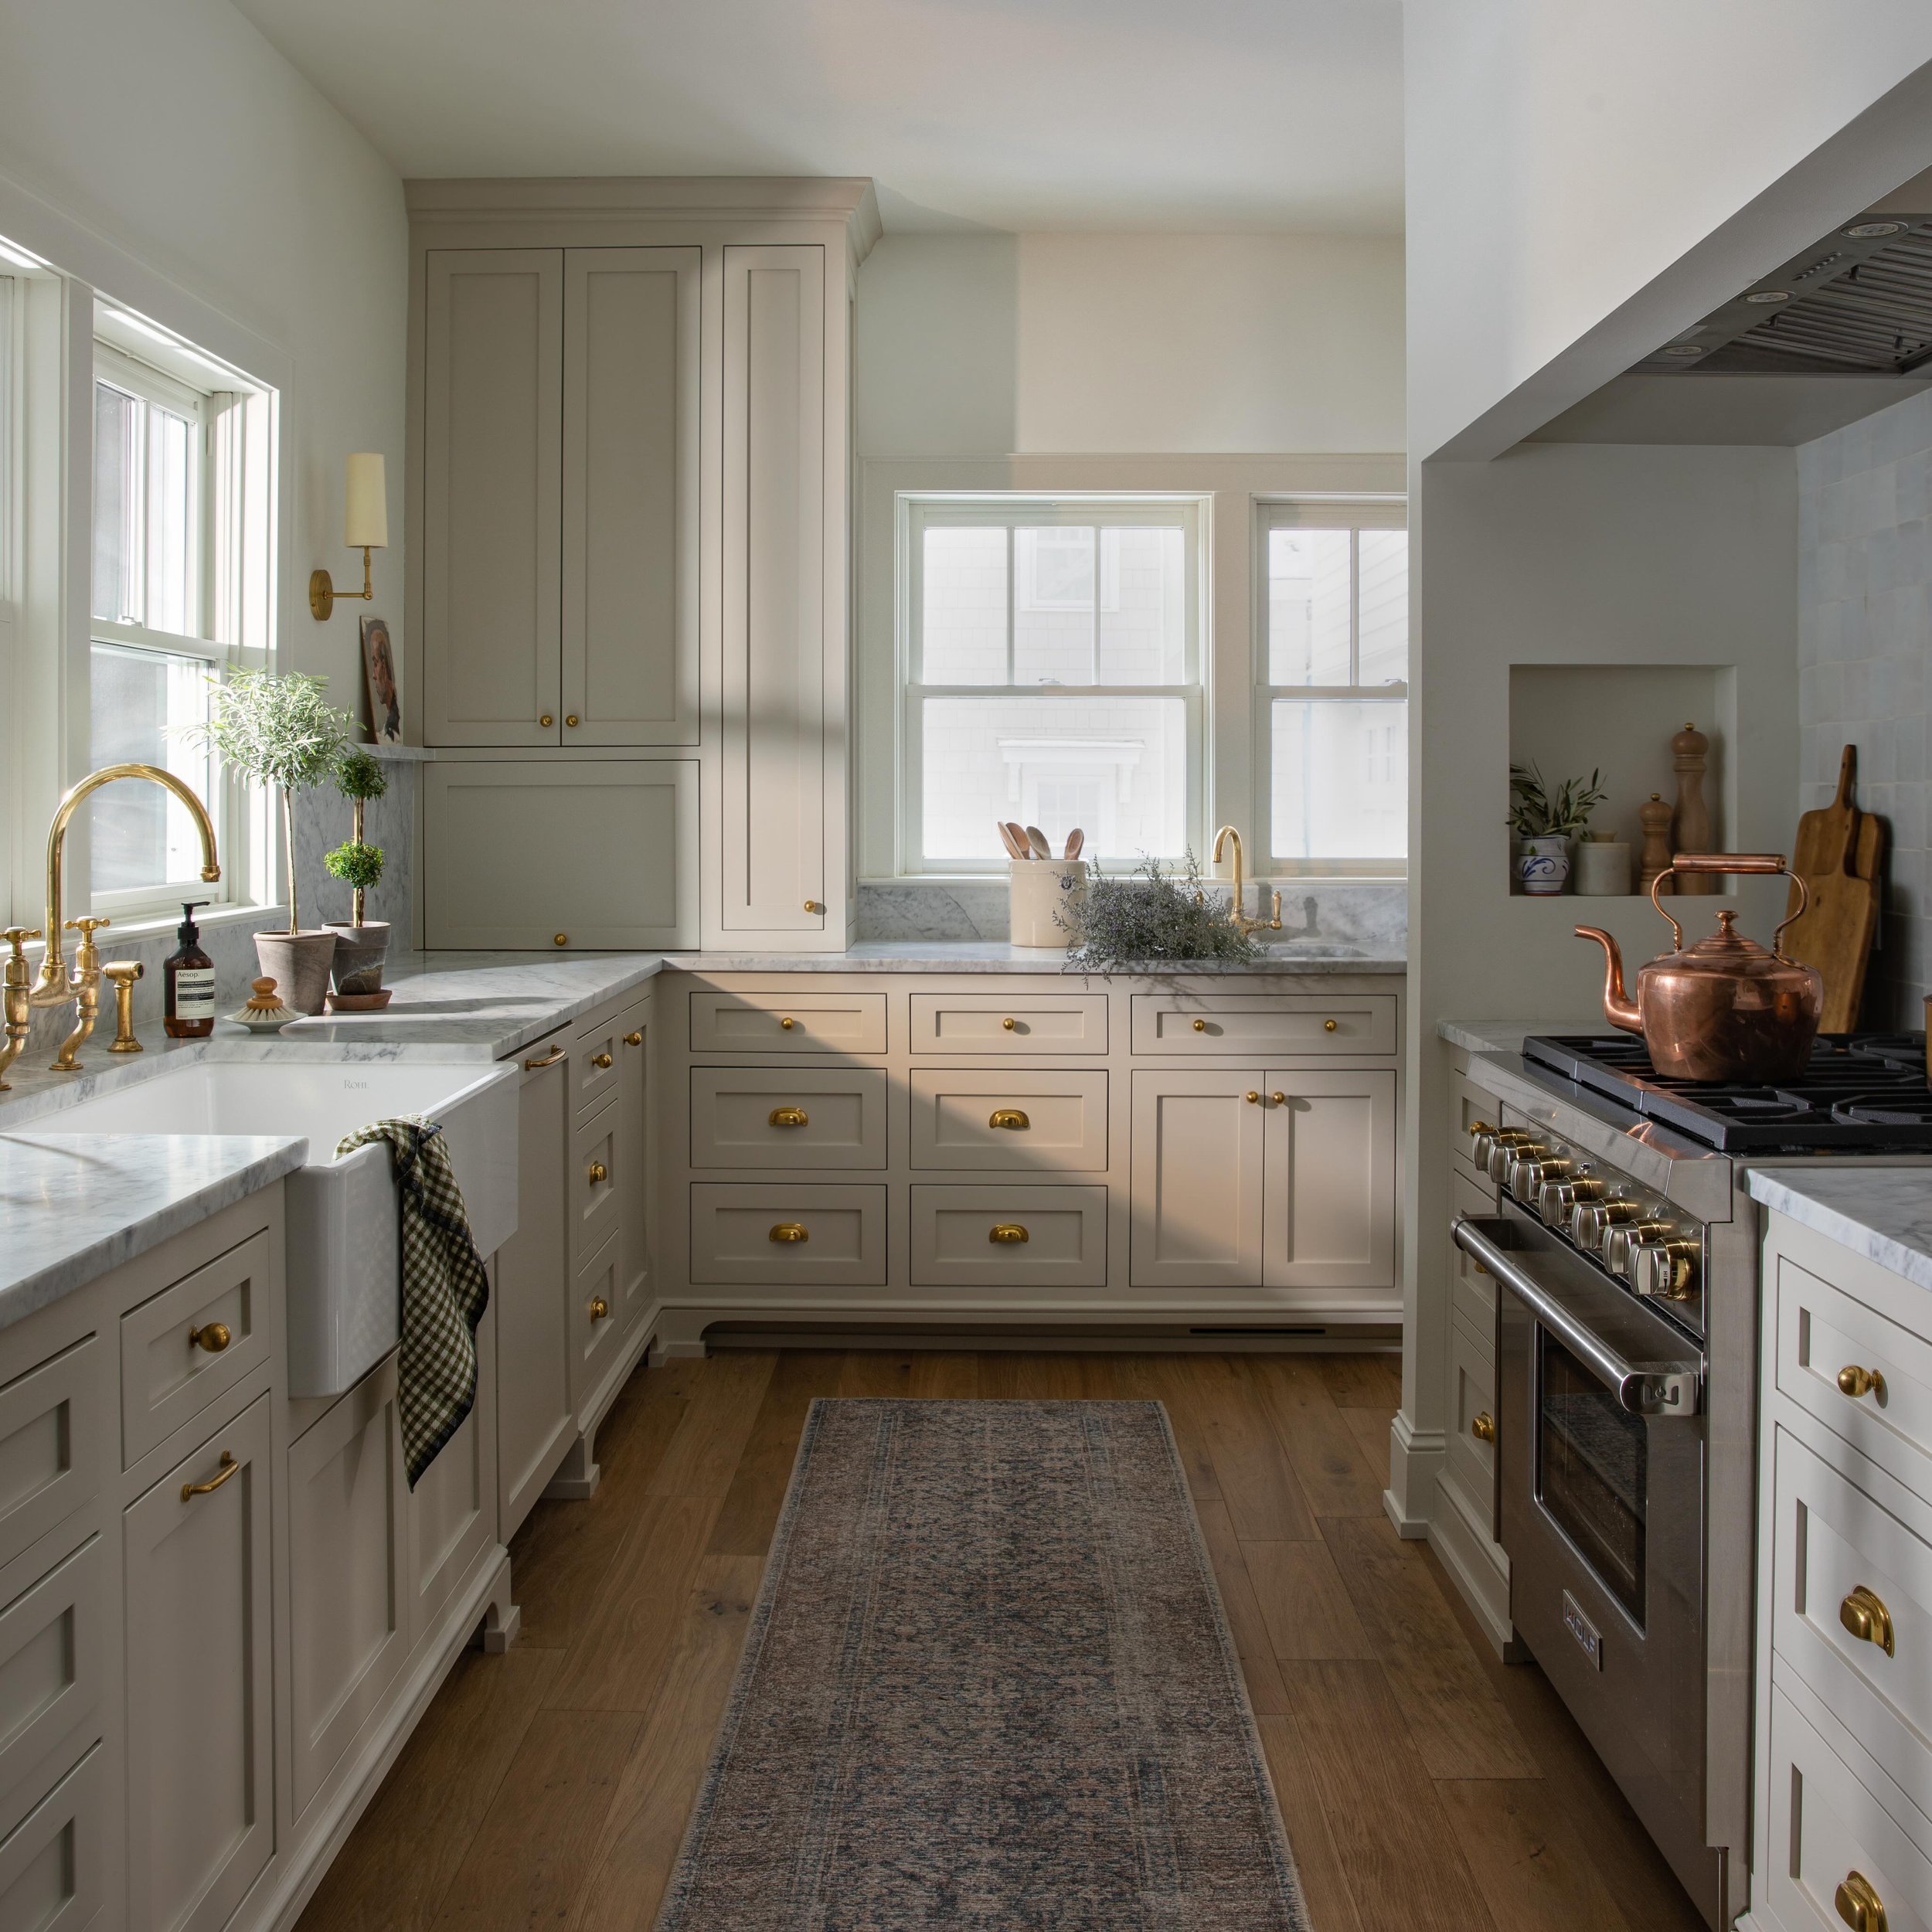 The old cliche that kitchens are the heart of the home holds true - they often are also the heart of our designs and so many whole-home details stem from the design decisions that begin and live in this room. Word to the wise - let your designer &amp